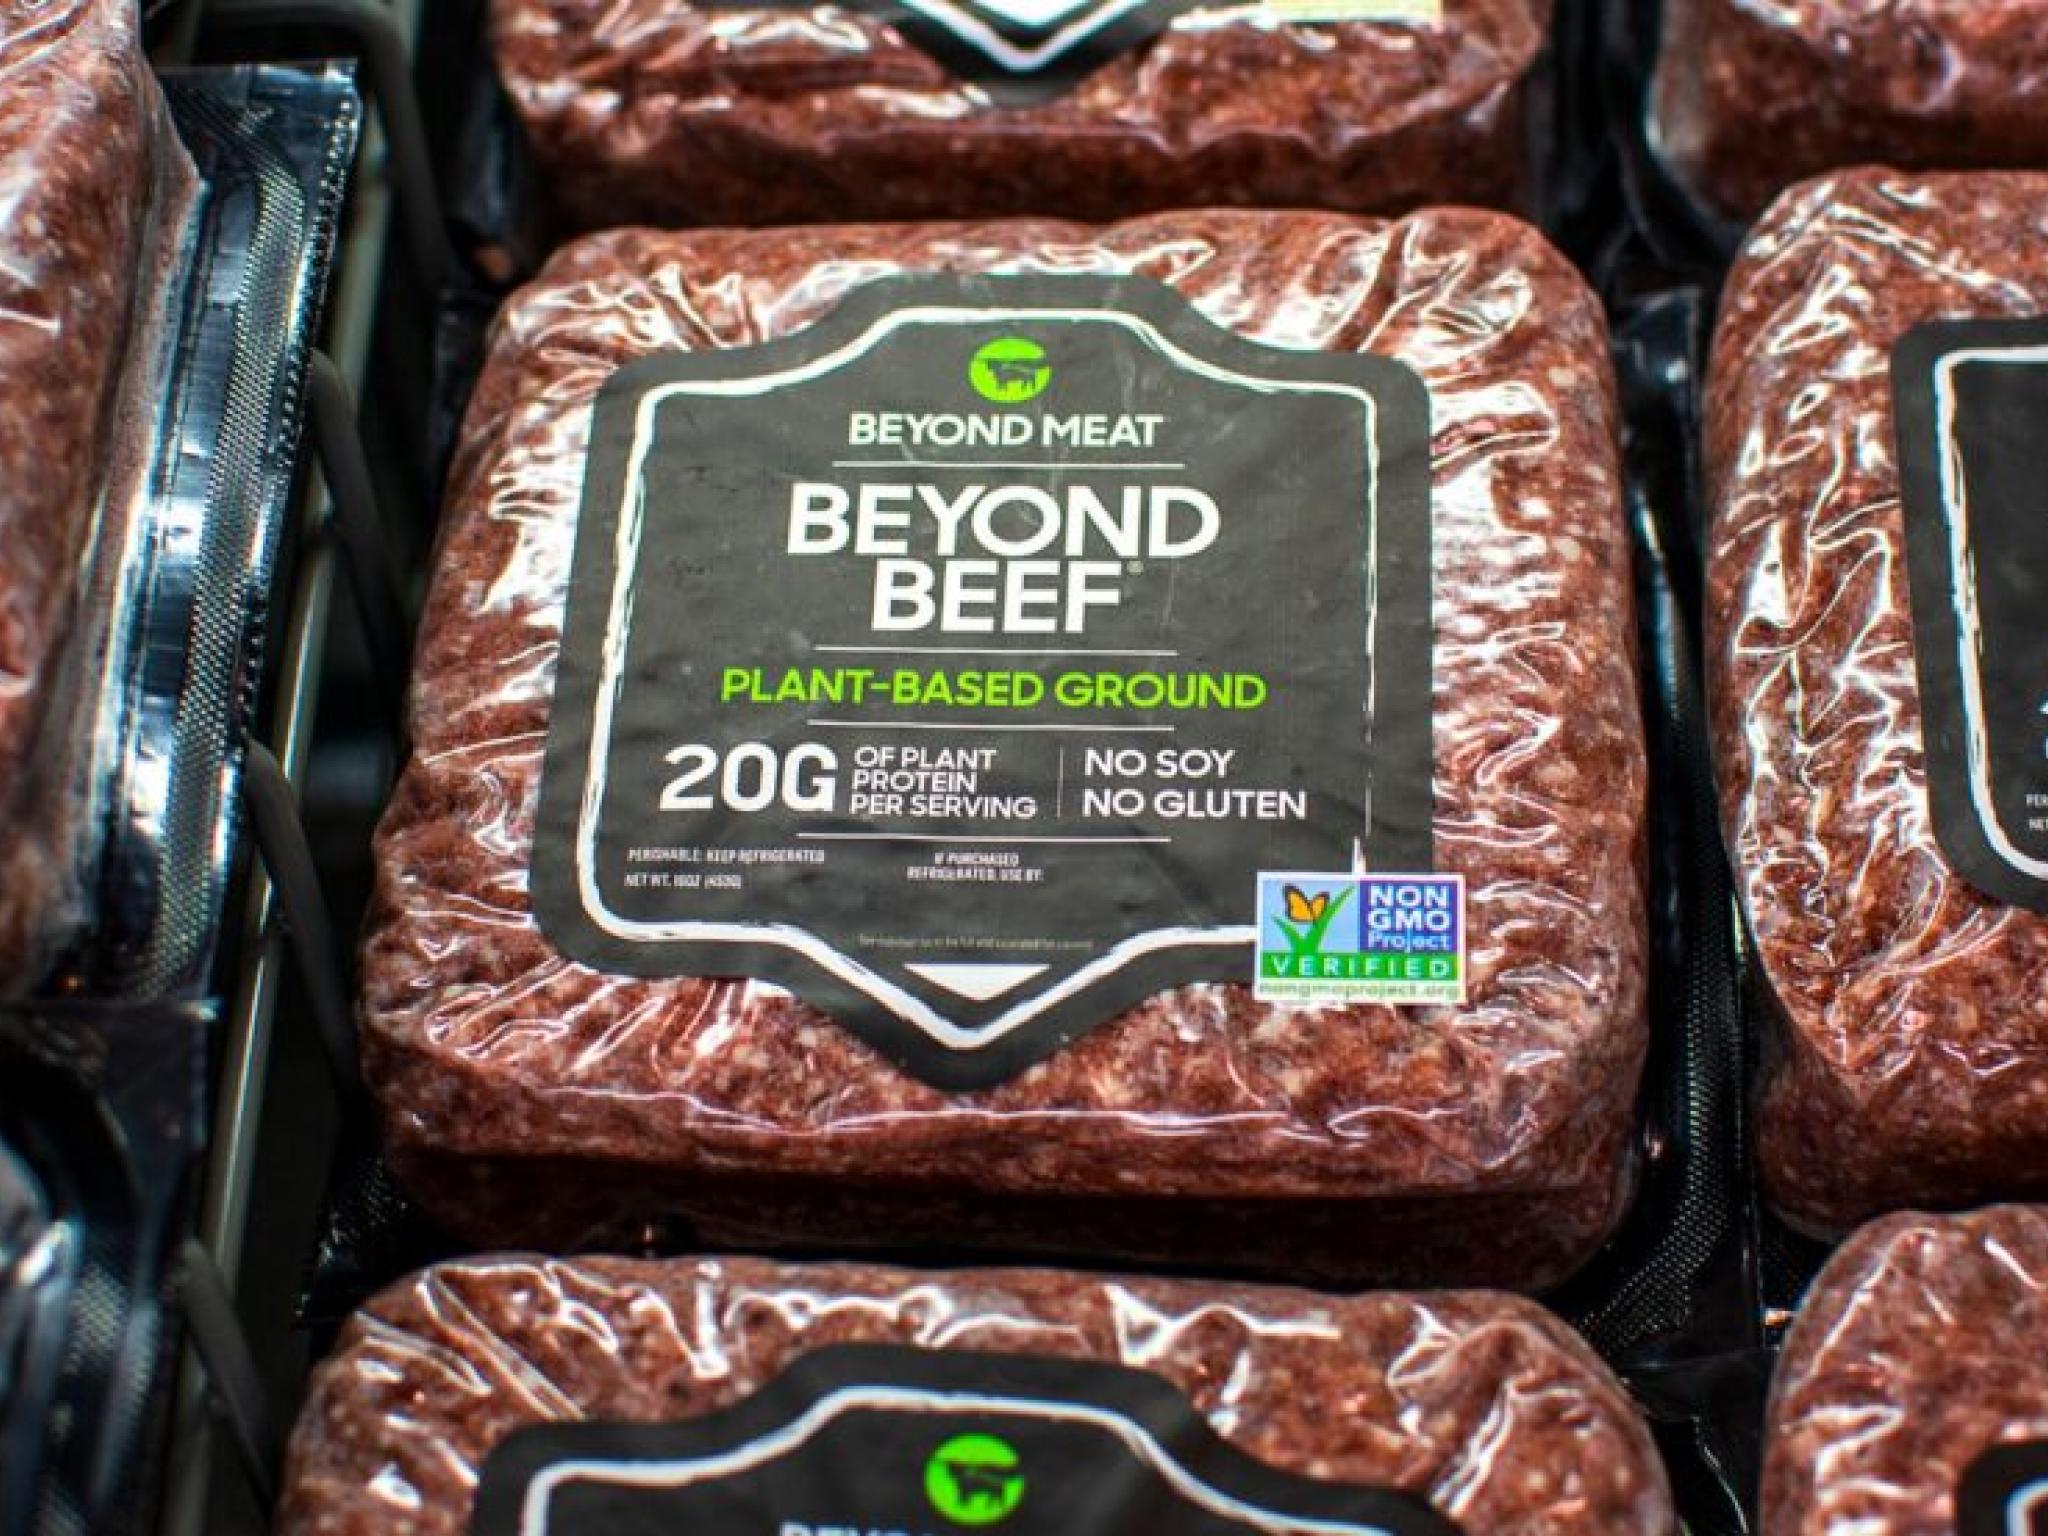  whats-going-on-with-beyond-meat-shares-thursday 